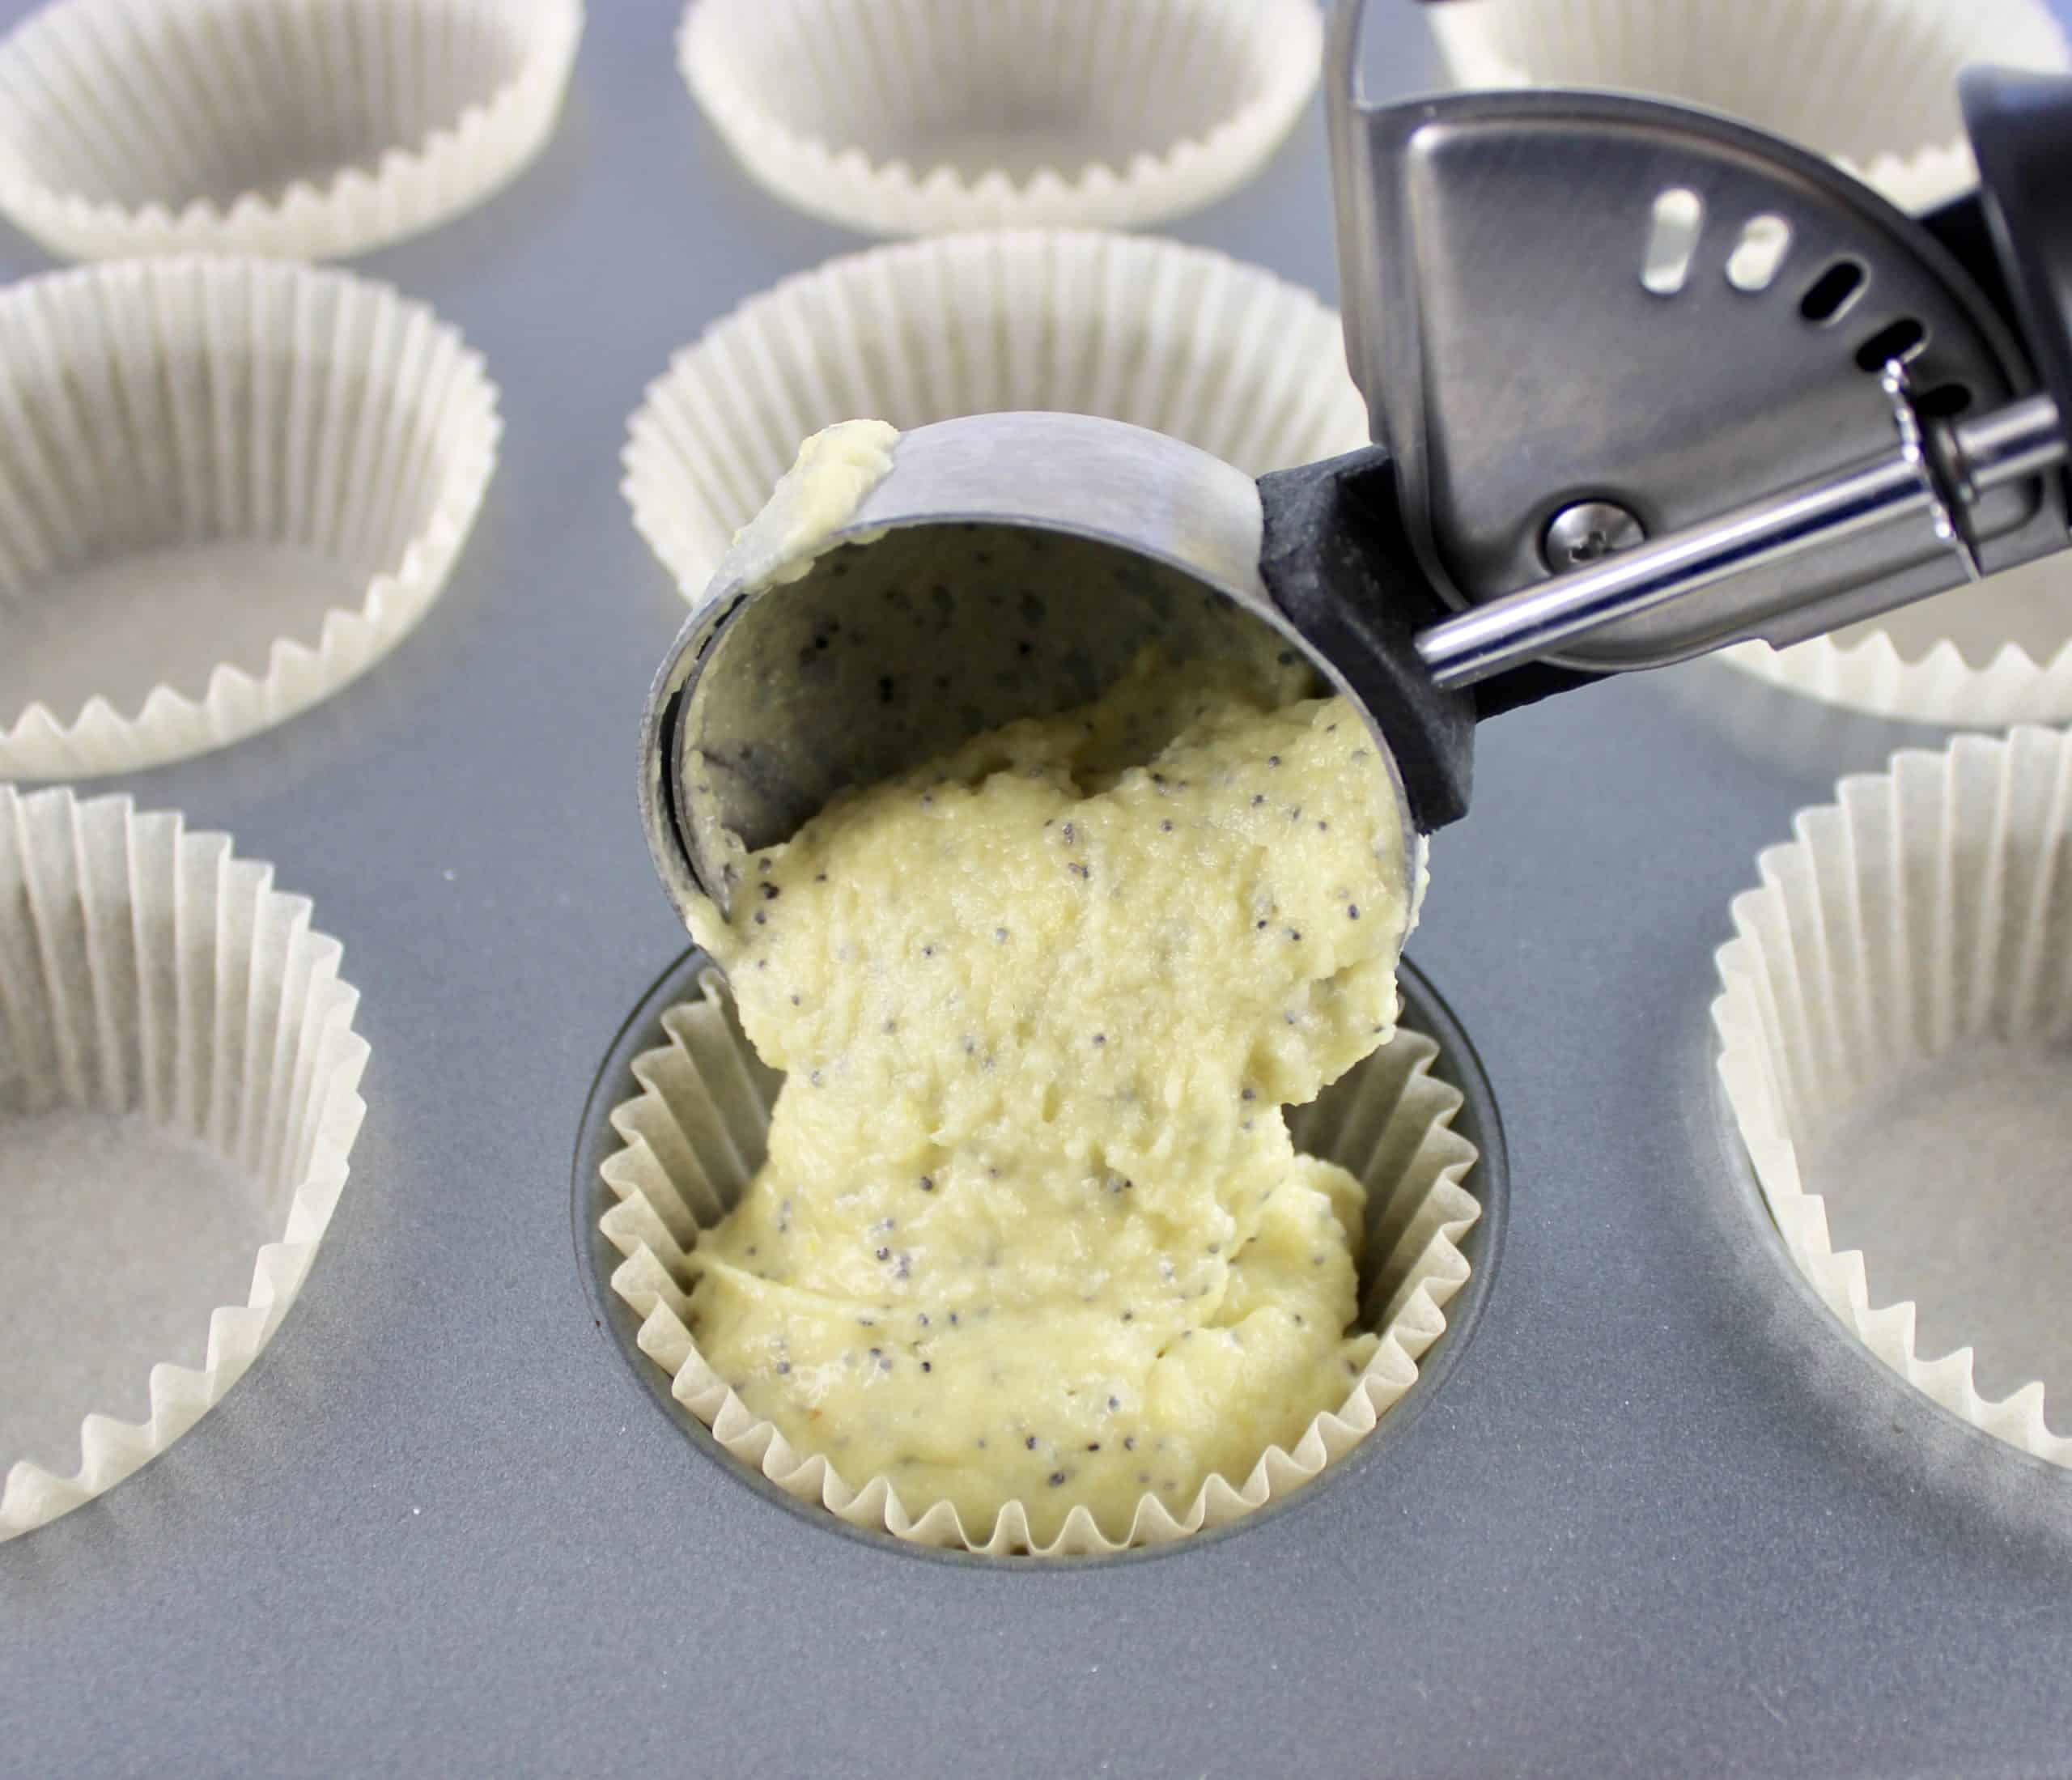 Keto Lemon Poppy Seed Muffins batter being poured from ice cream scoop into muffin pan with liners